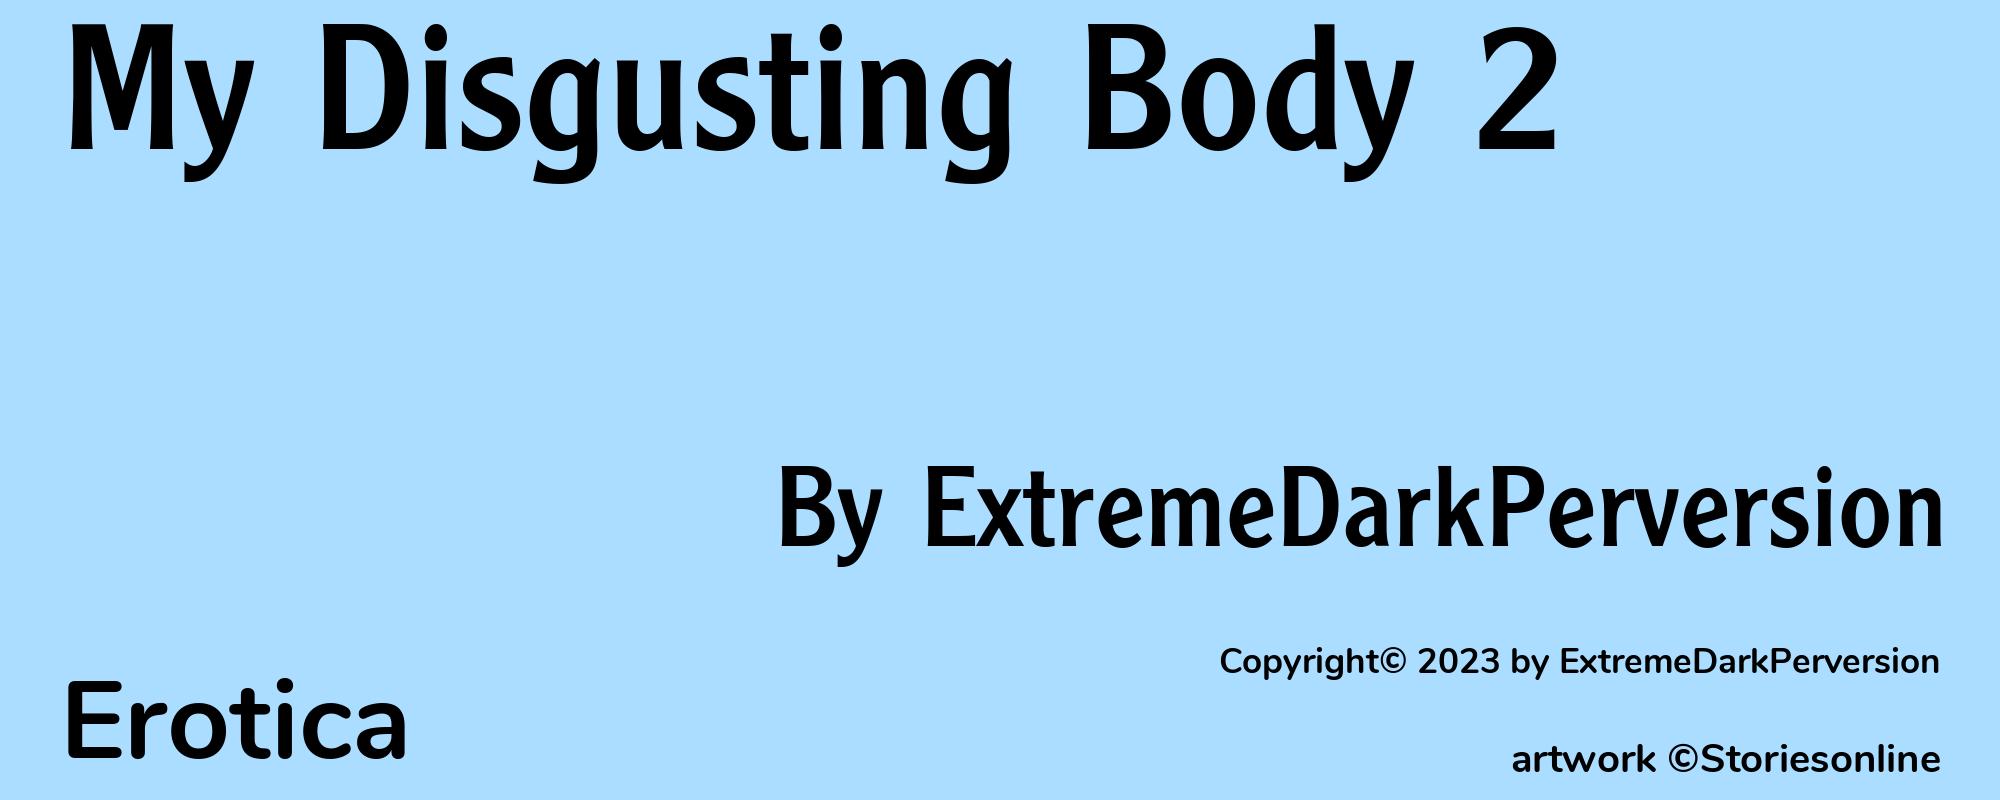 My Disgusting Body 2 - Cover